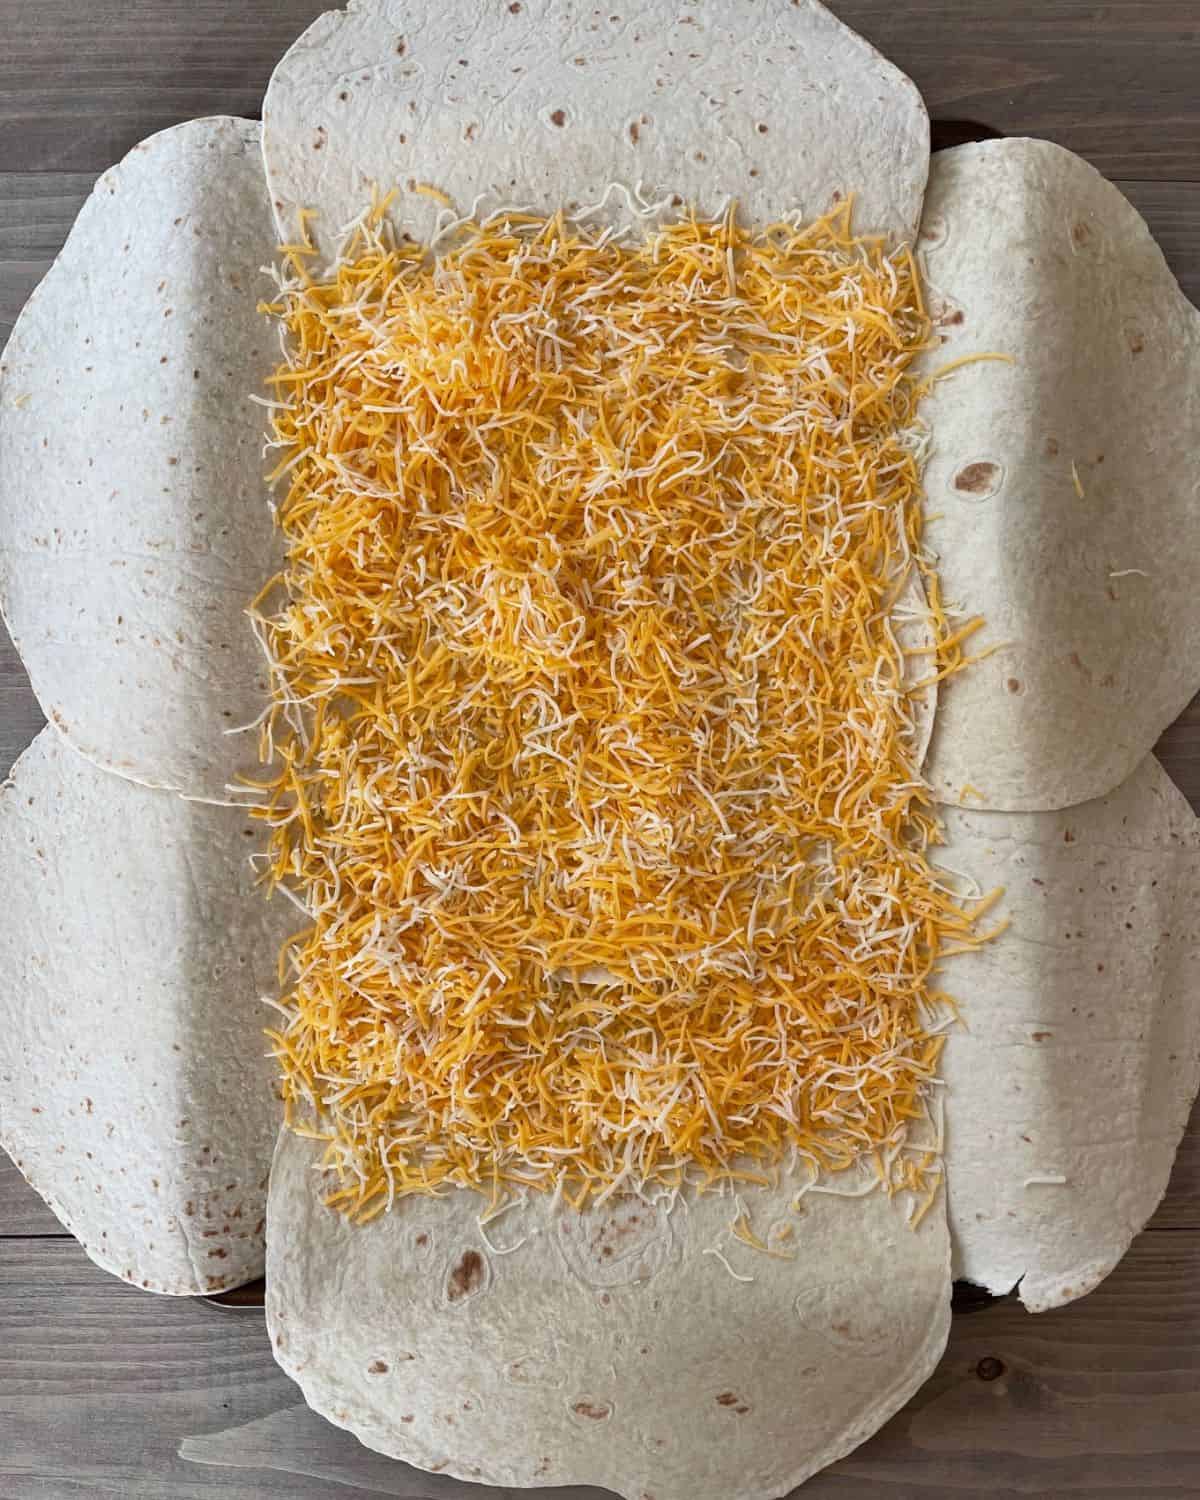 Shredded Mexican blend cheese layered onto the tortilla shells.